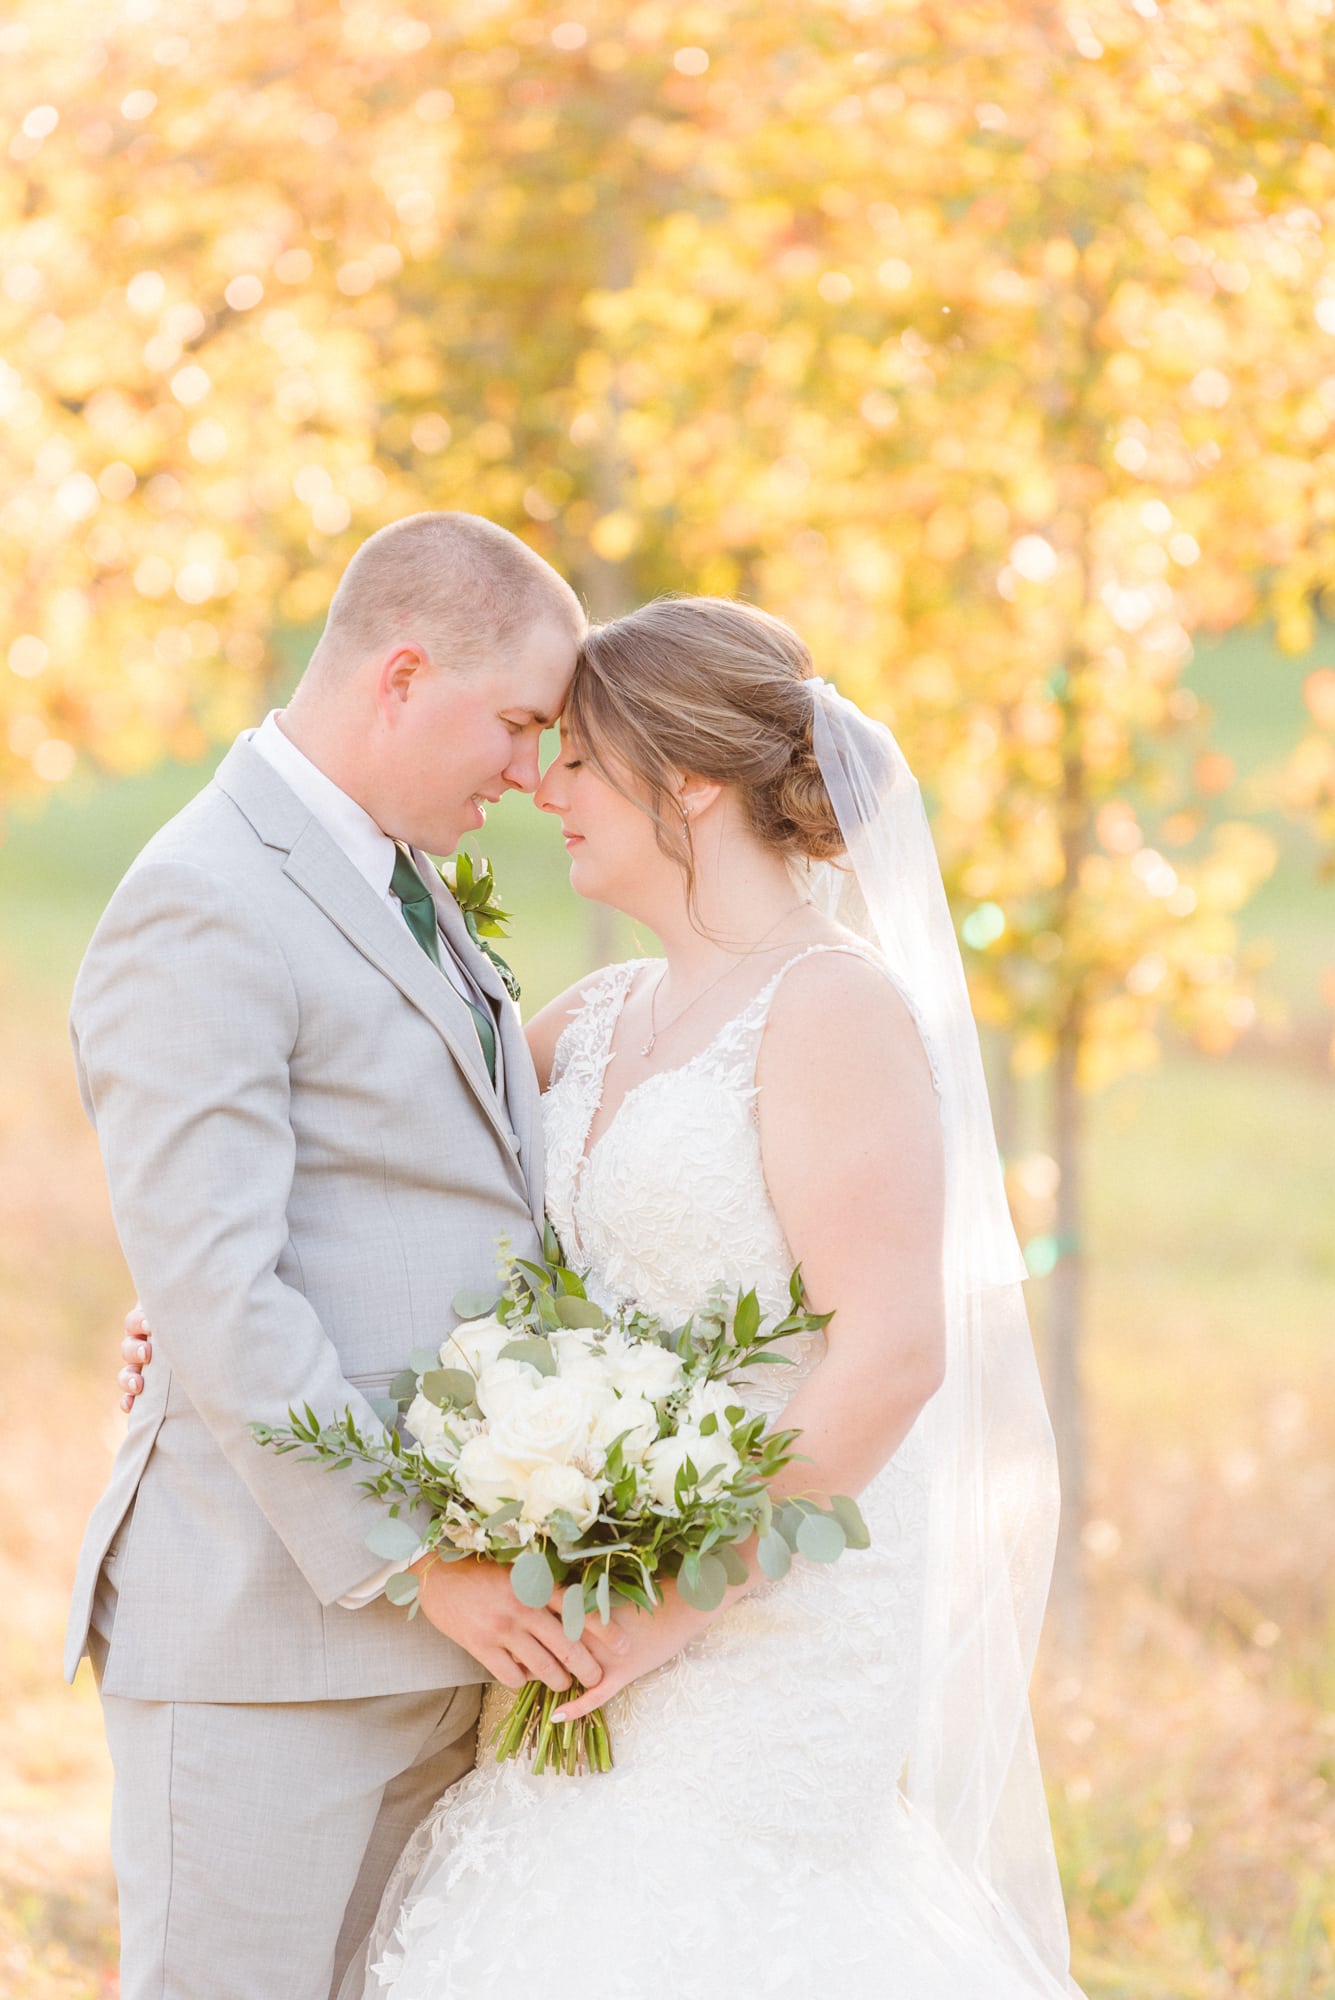 Katelynn and Alec stand nose-to-nose with golden trees behind them after their wedding at Low Meadows Estate.